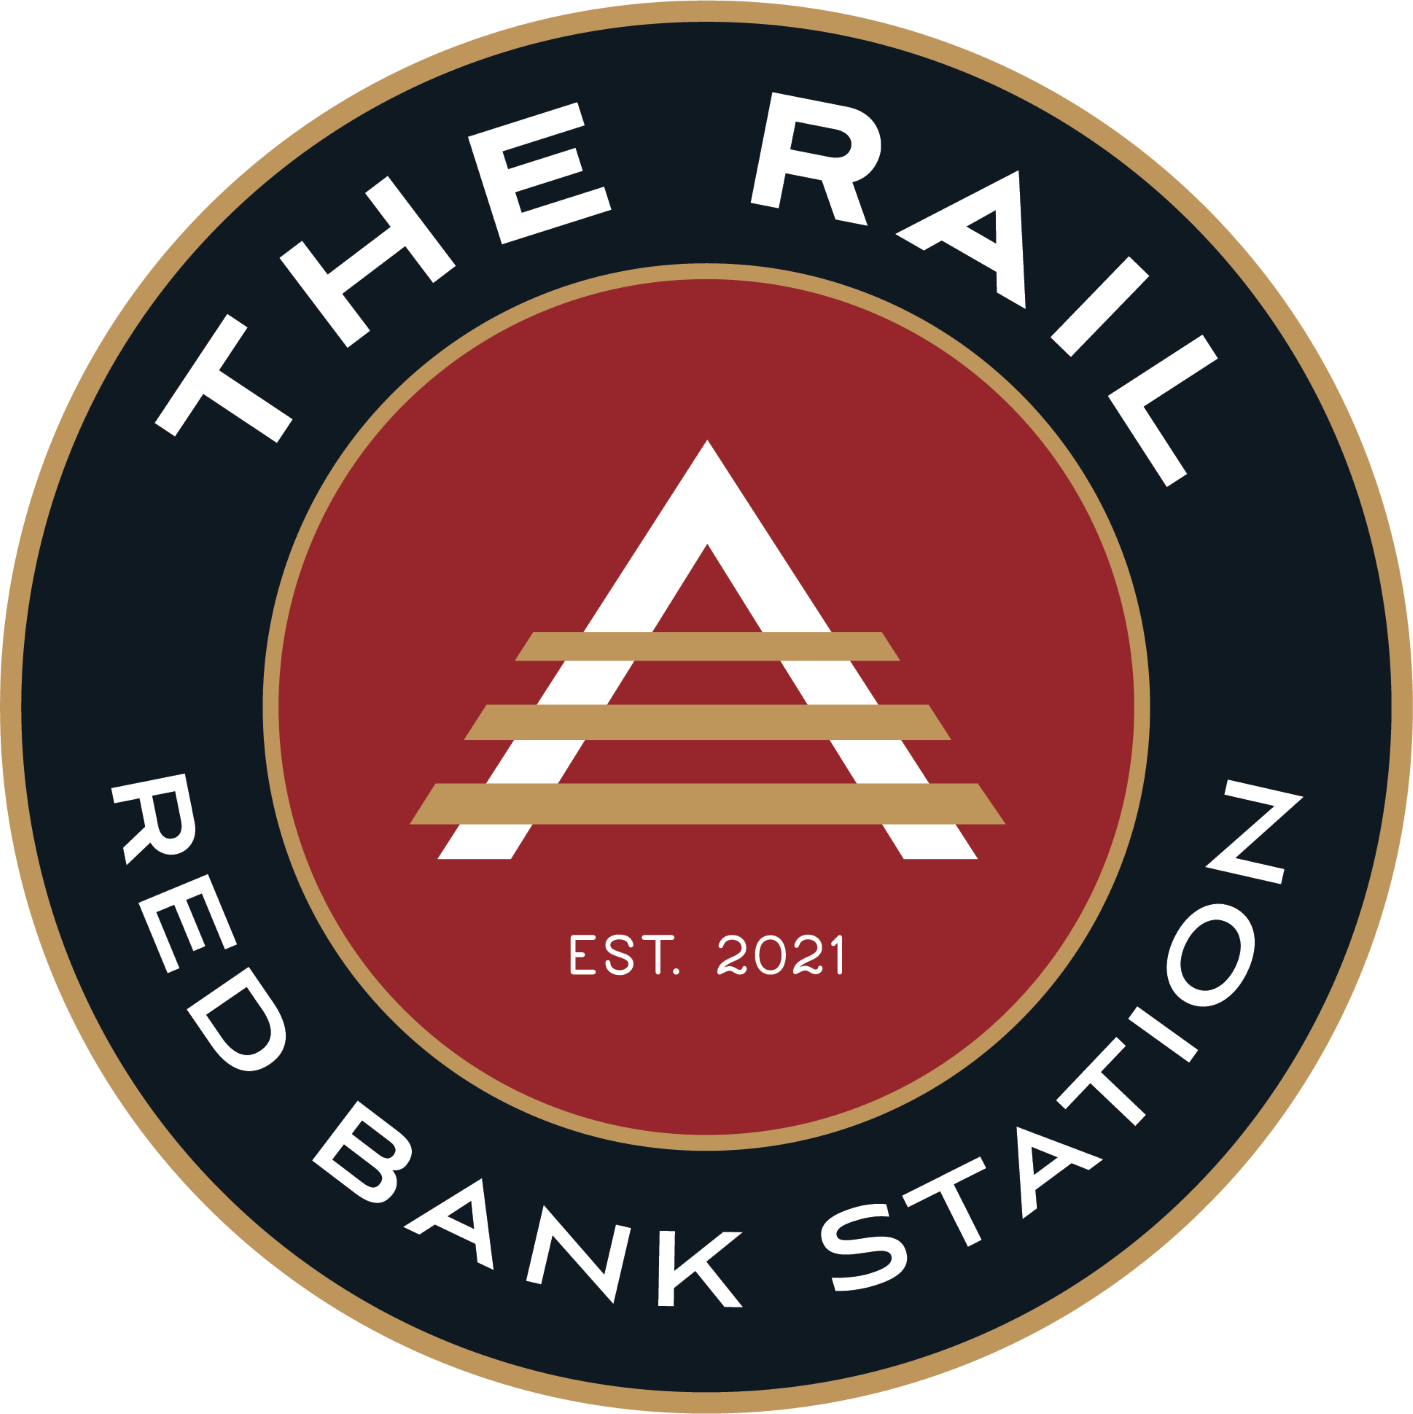 The Rail at Red Bank Denholtz